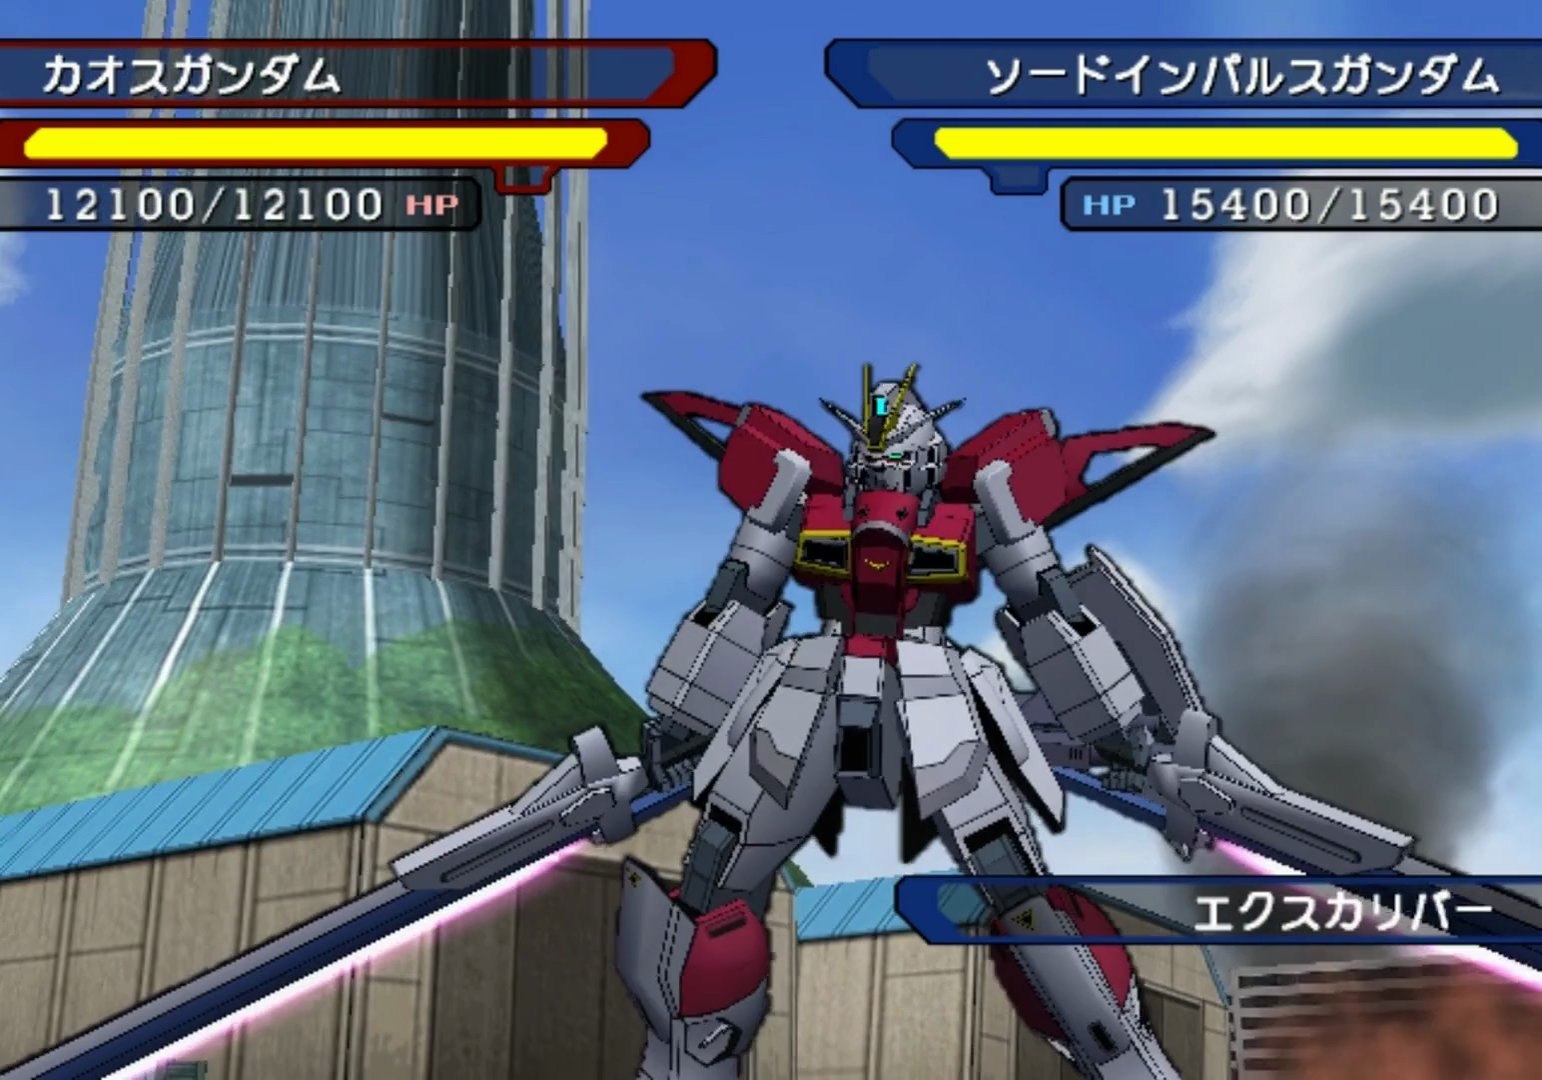 Mobile Suit Gundam Seed Destiny Generation Of Ce Jap Ps2 Yuuji 17 Brb Thinking